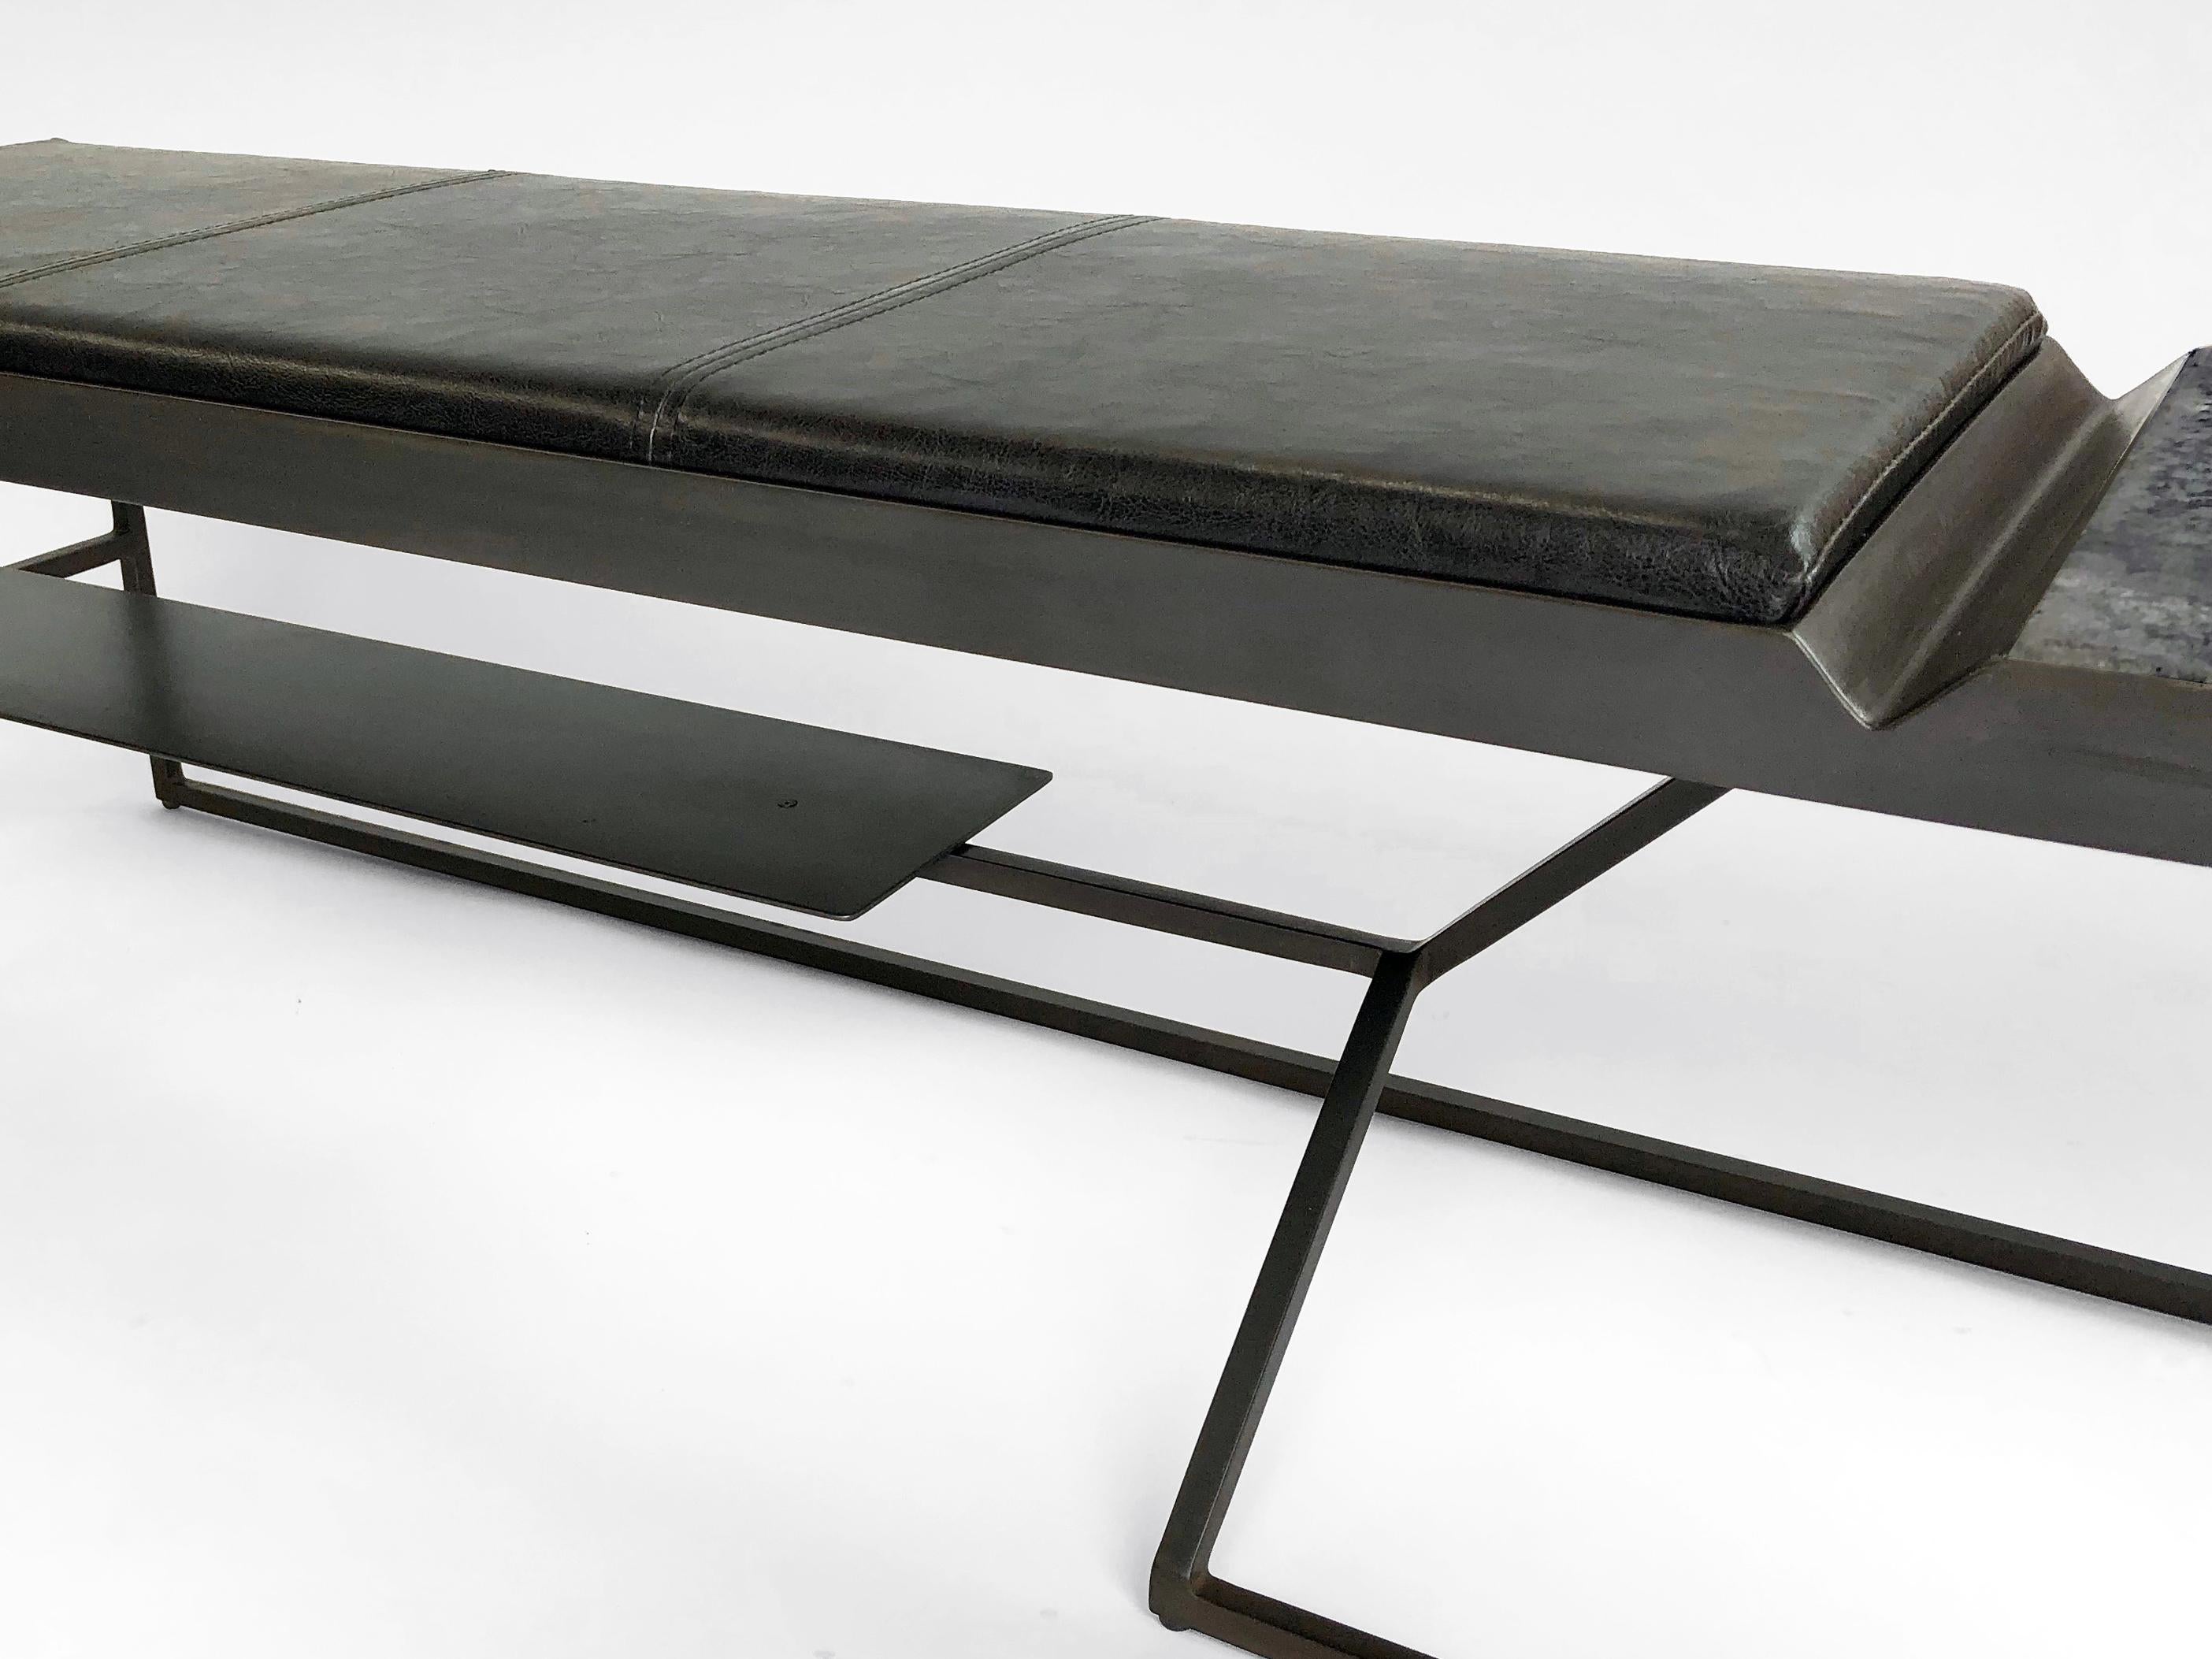 Contemporary Grey Bird Bench, Concrete + Steel Collection from Joshua Howe Design